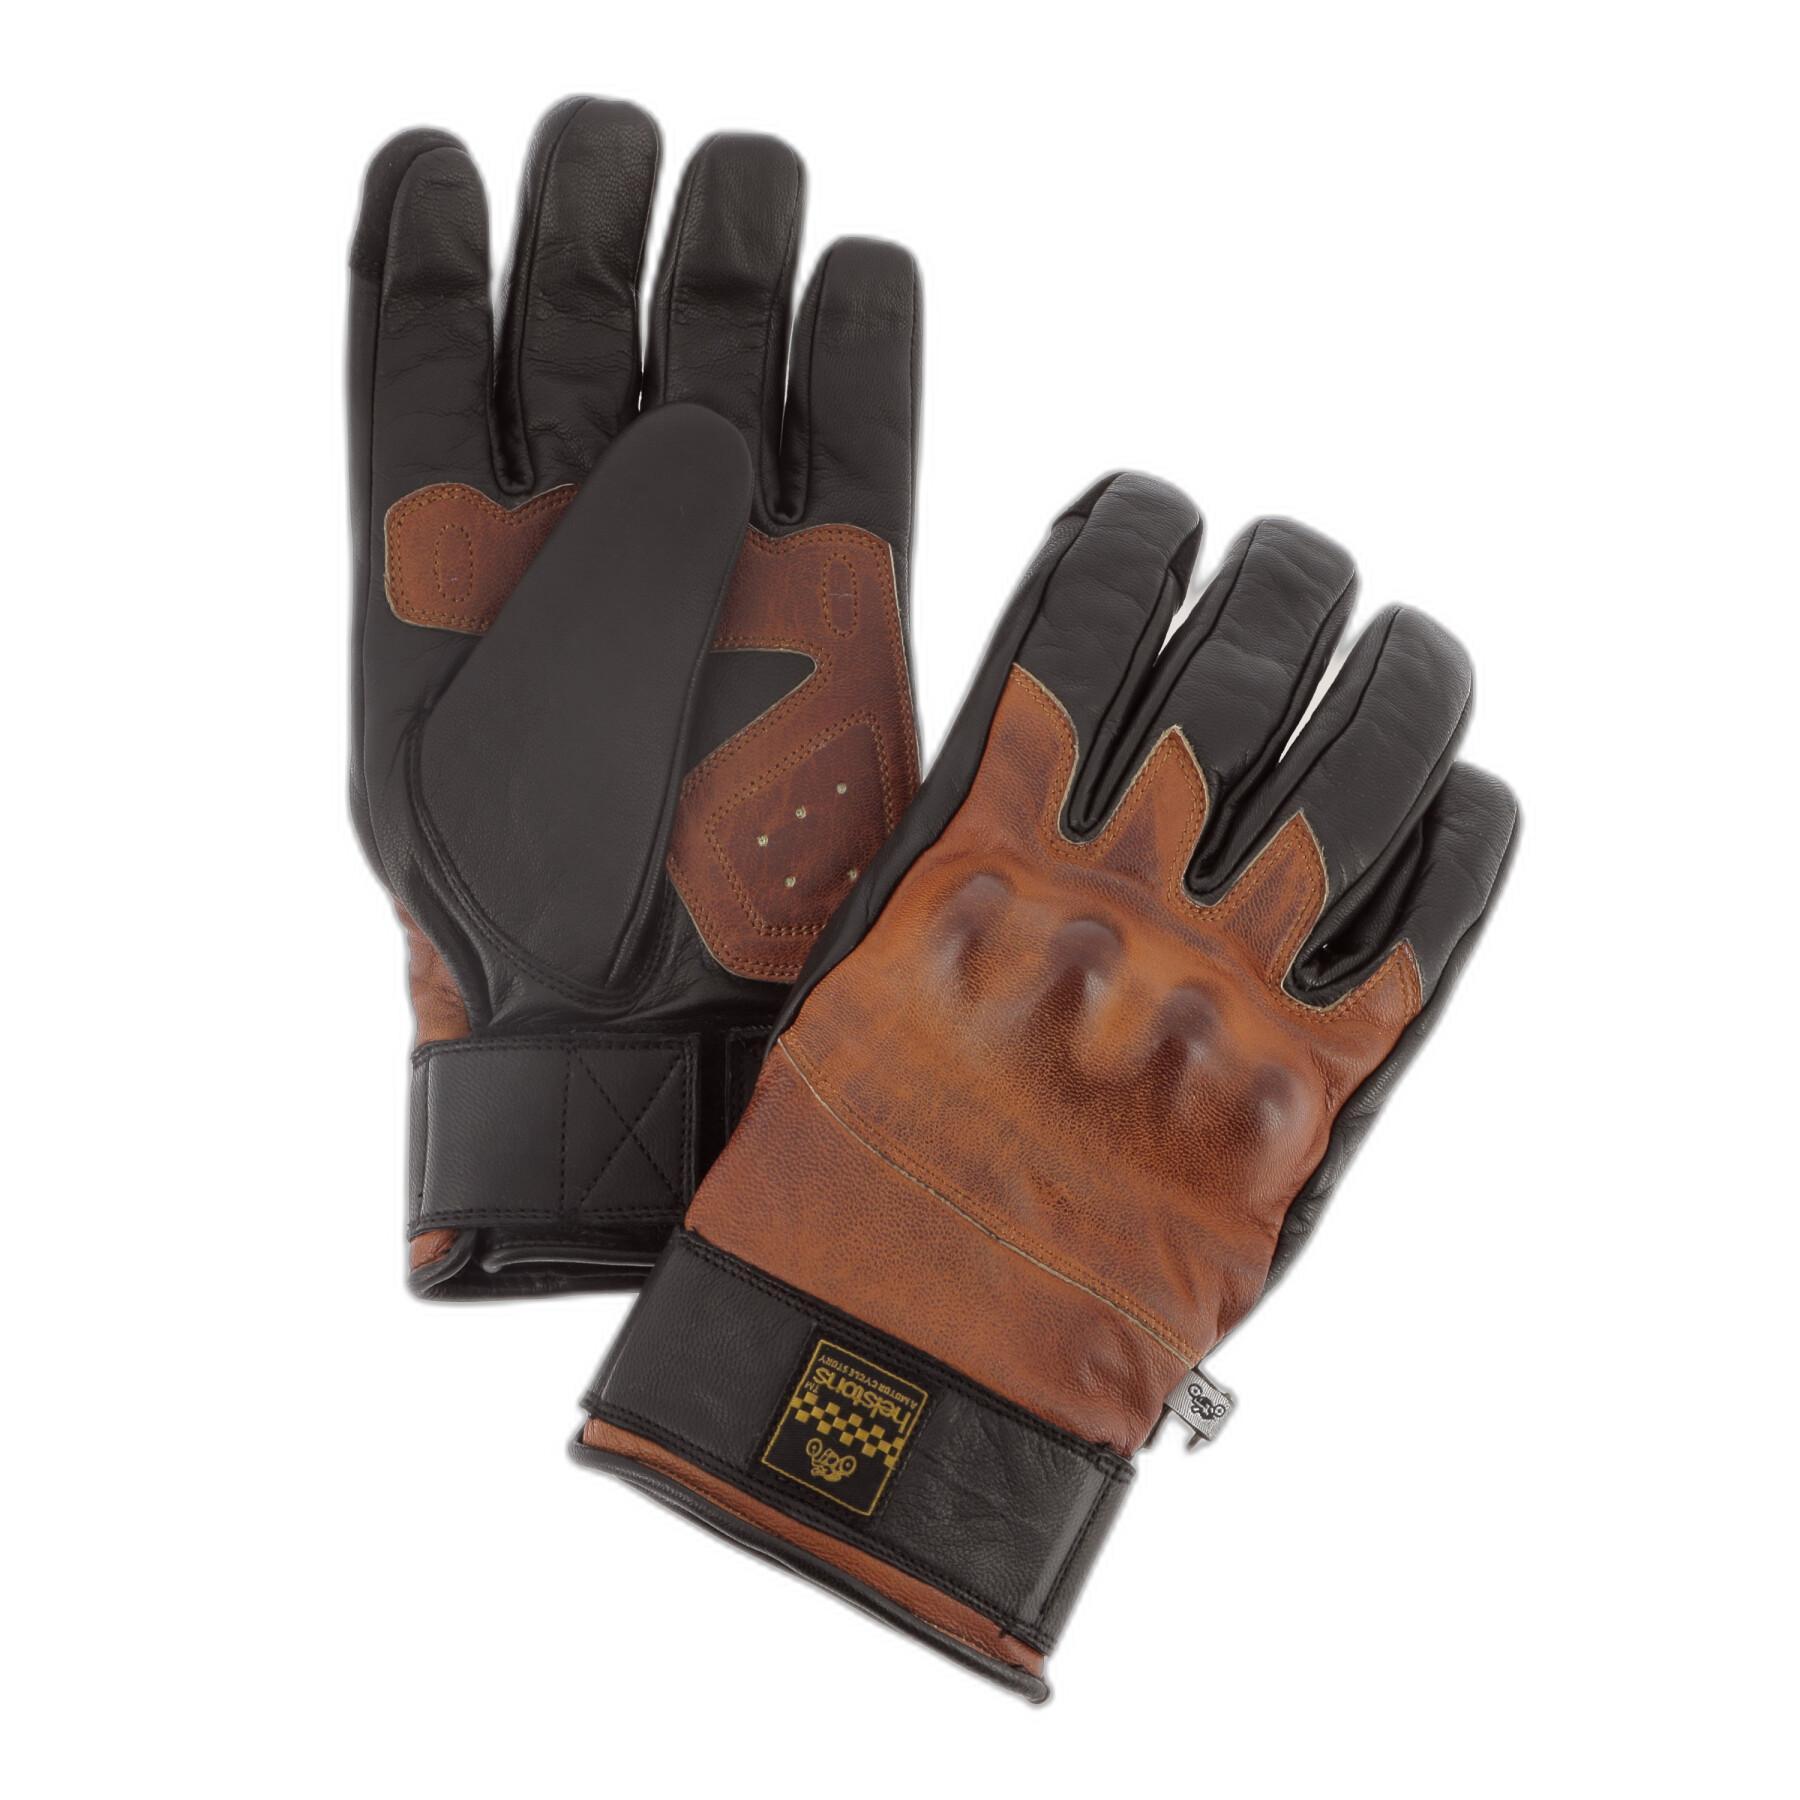 Winter leather motorcycle gloves Helstons Glory